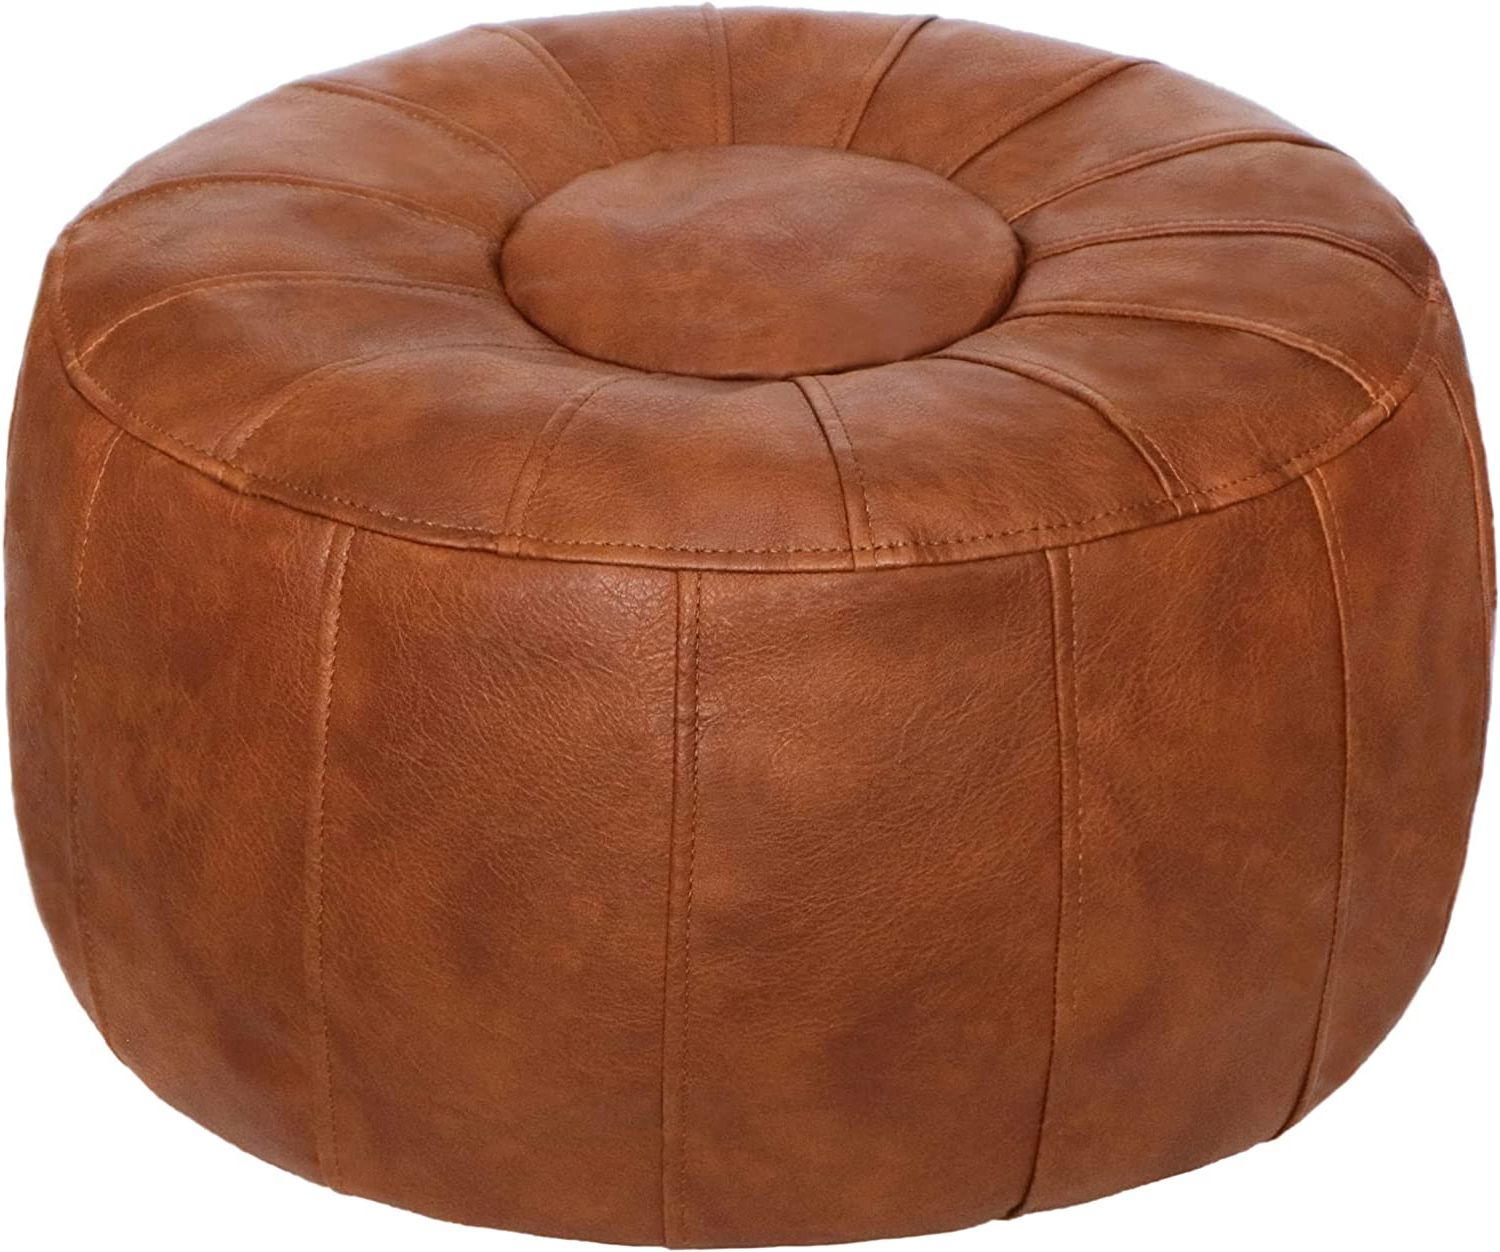 2018 Brown Wash Round Ottomans For Thgonwid Unstuffed Handmade Moroccan Round Pouf Foot Stool Ottoman Seat  Faux Leather Large Storage Bean Bag Floor Chair Foot Rest For Living Room,  Bedroom Or Wedding Gifts (light Brown) : Amazon (View 3 of 10)